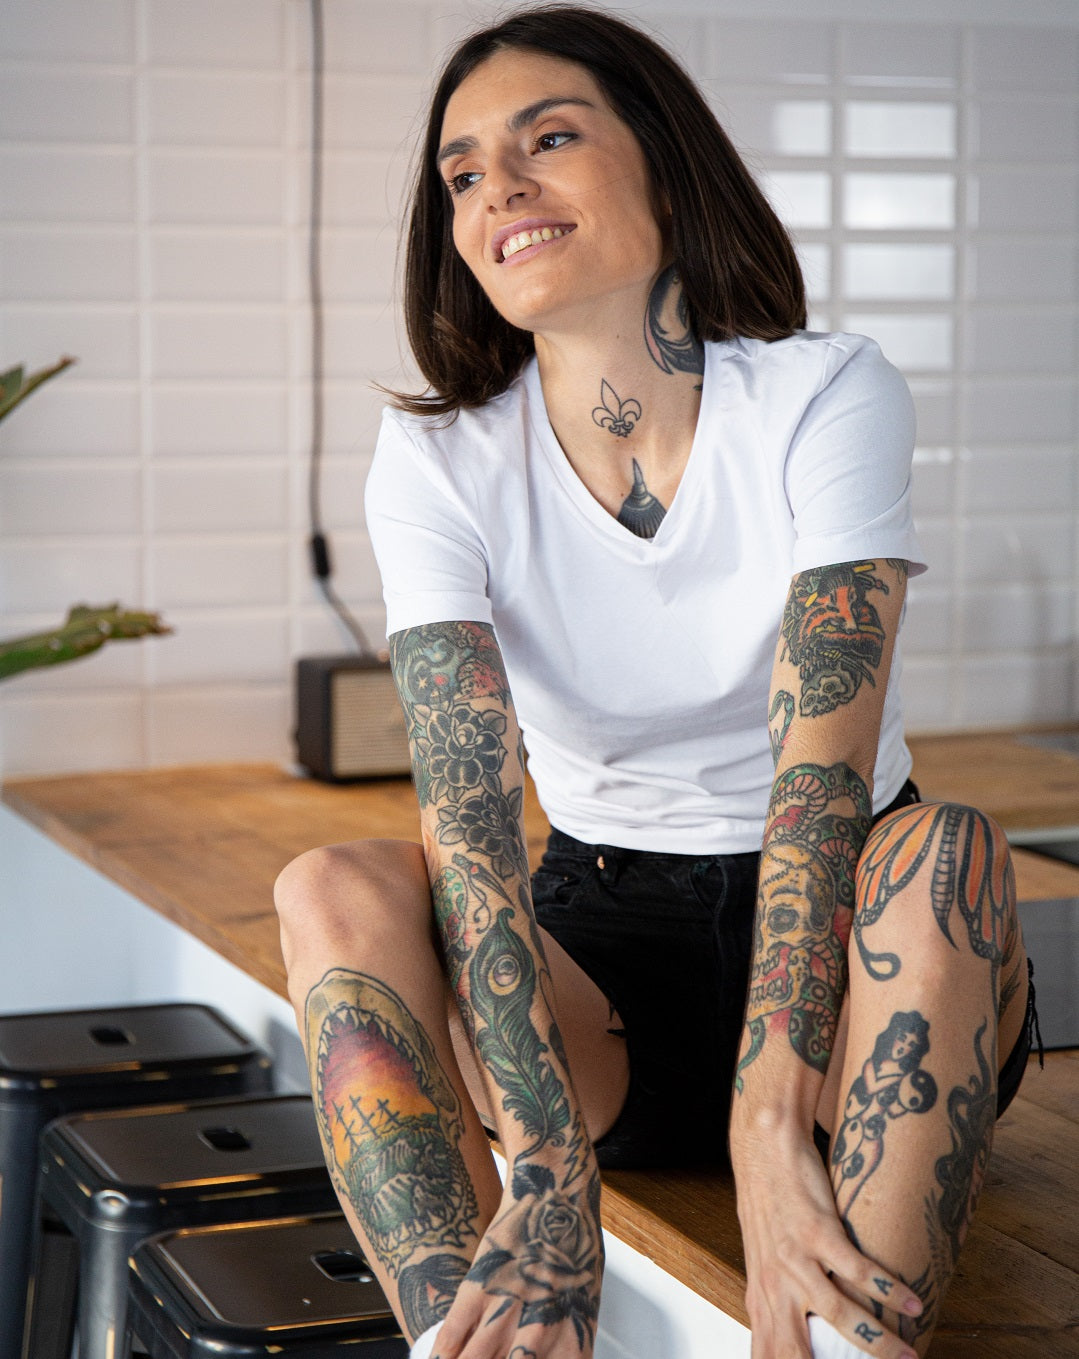 How to design a sleeve tattoo – Stories and Ink